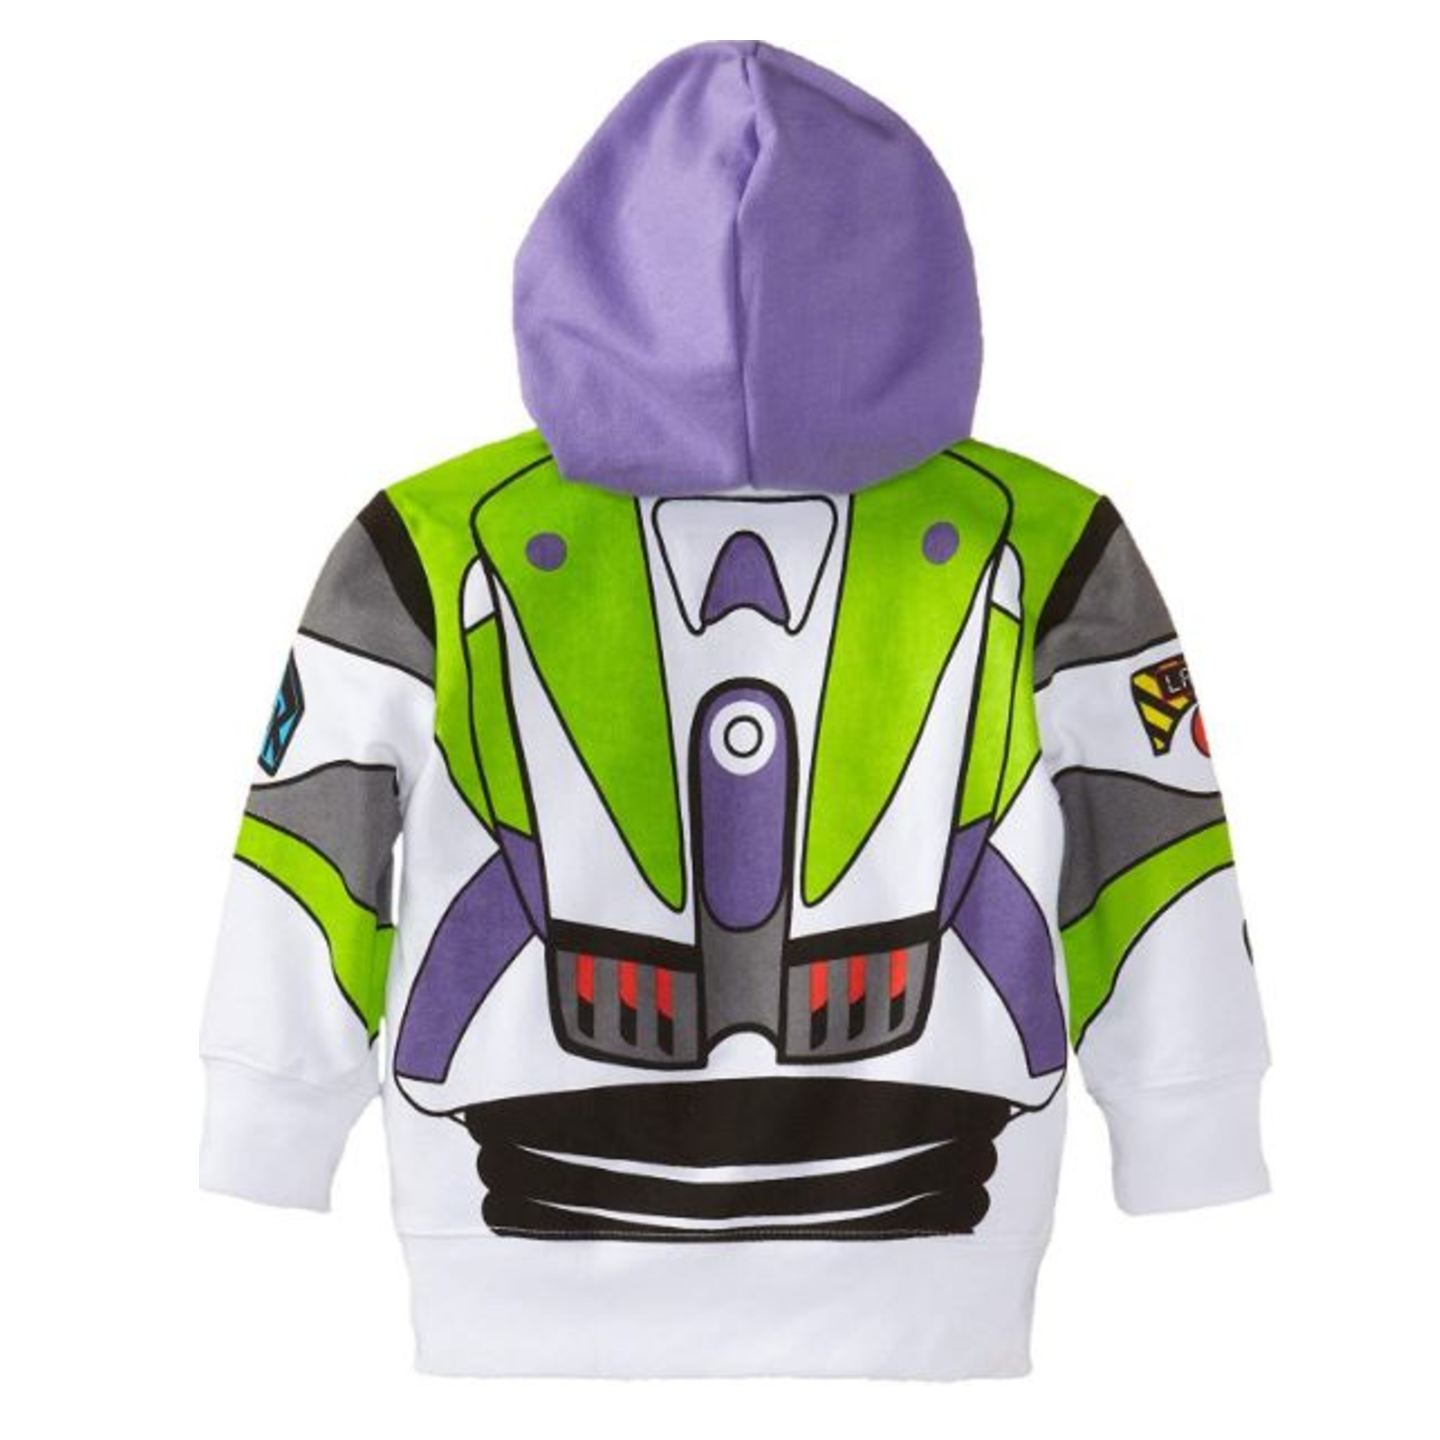 Preorder: Toy Story 4 Jacket